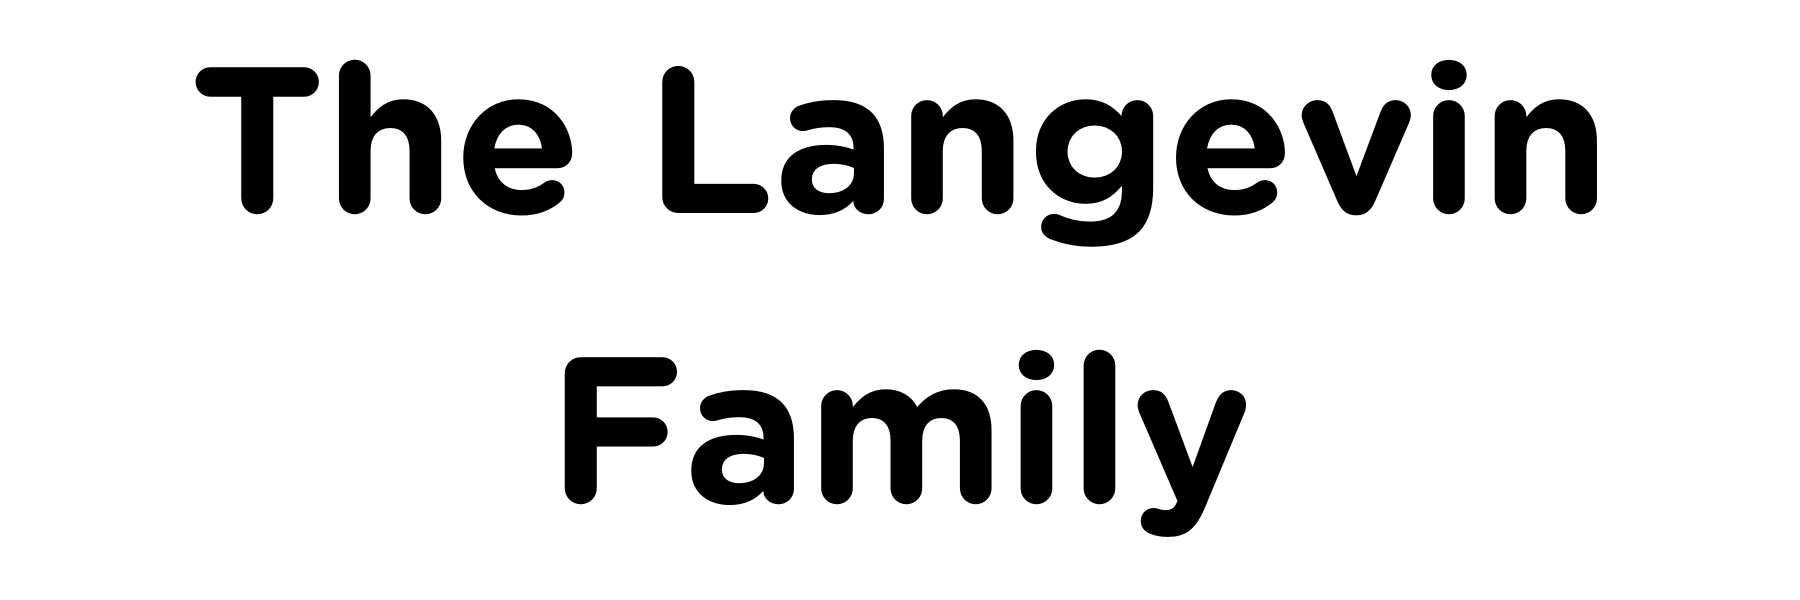 The Langevin Family